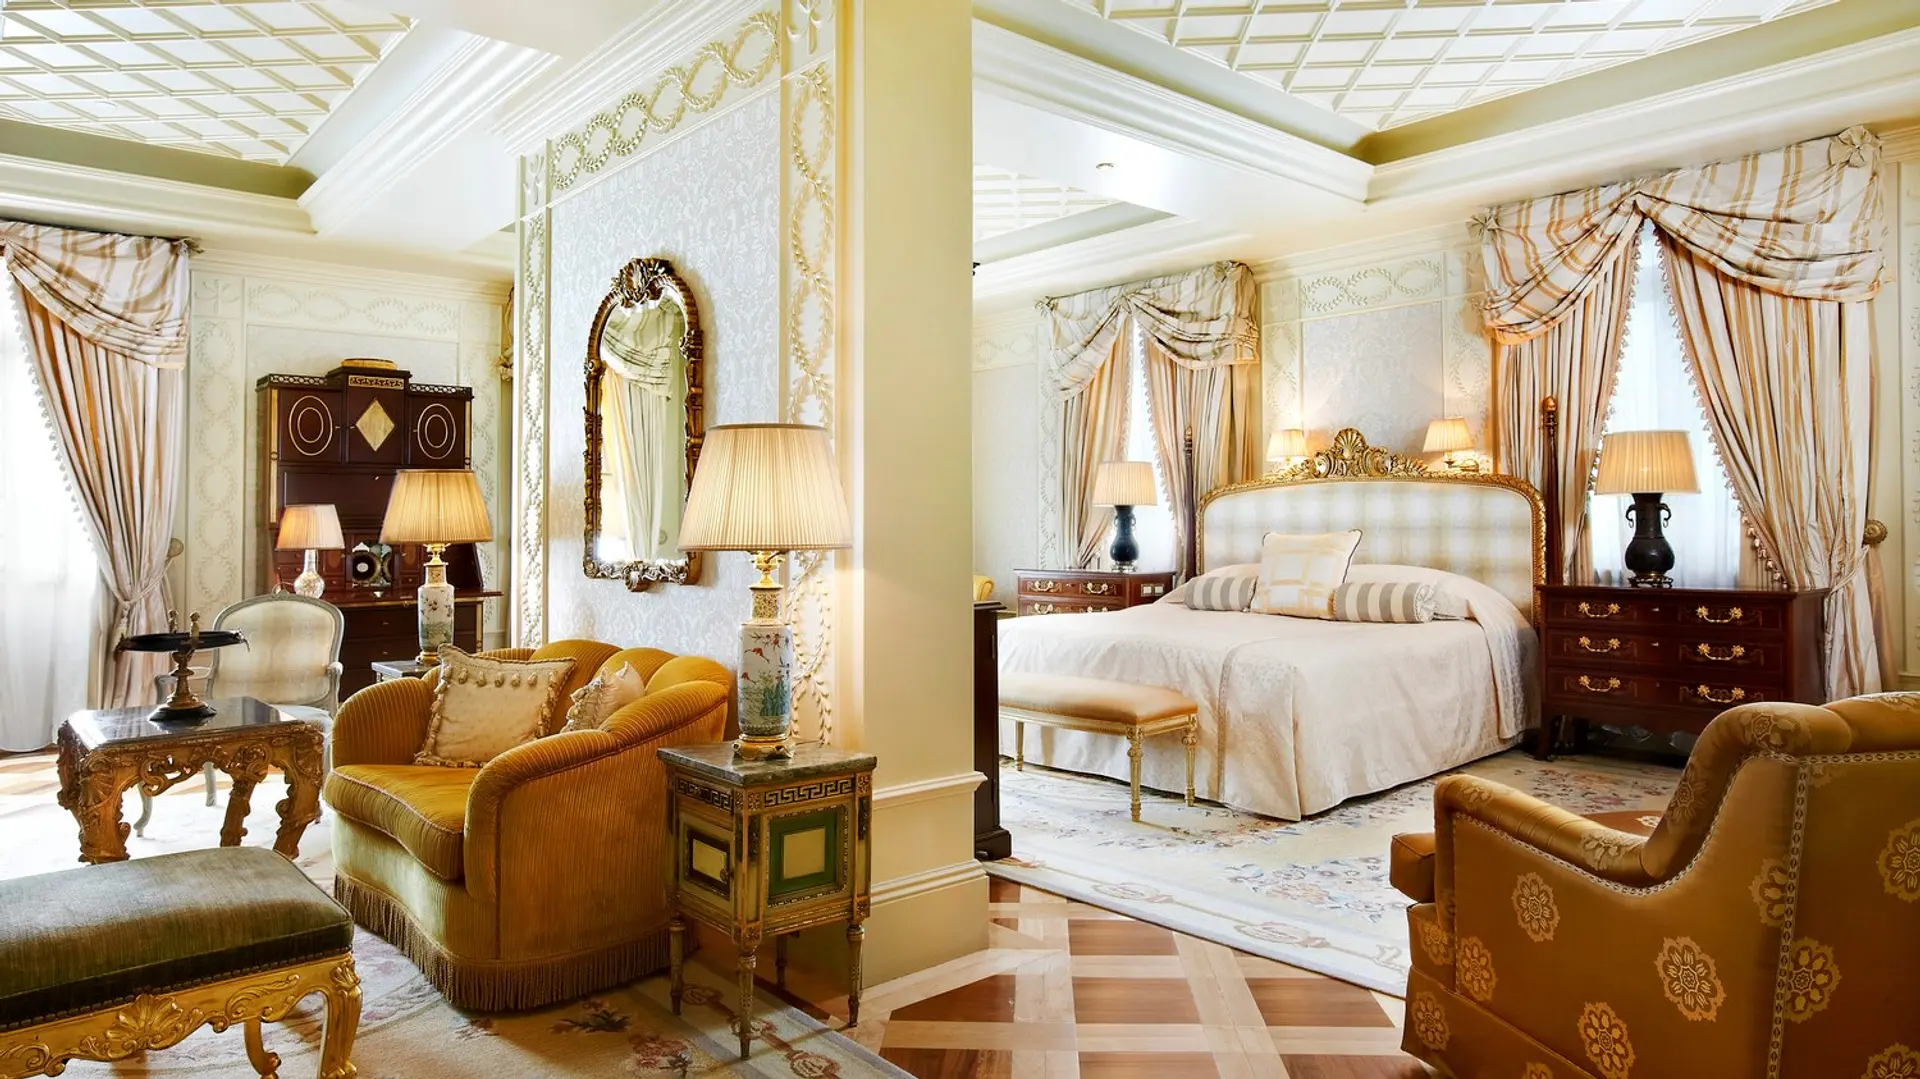 Hotel review Accommodation' - Hotel Grande Bretagne, a Luxury Collection Hotel - 6